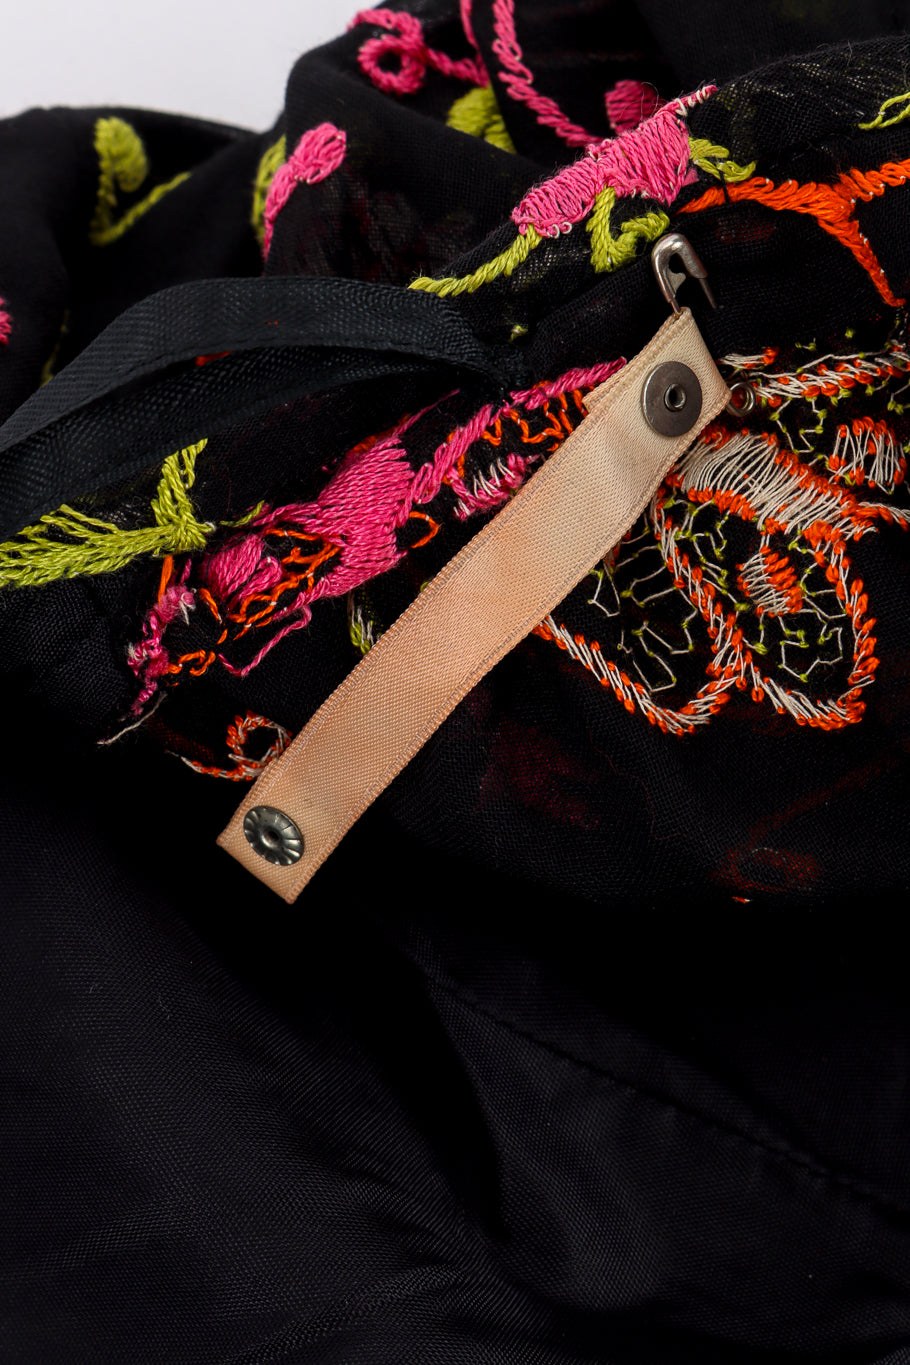 Vintage Mr. Blackwell Embroidered Butterfly Peasant Dress shoulder strap retainers @recess la